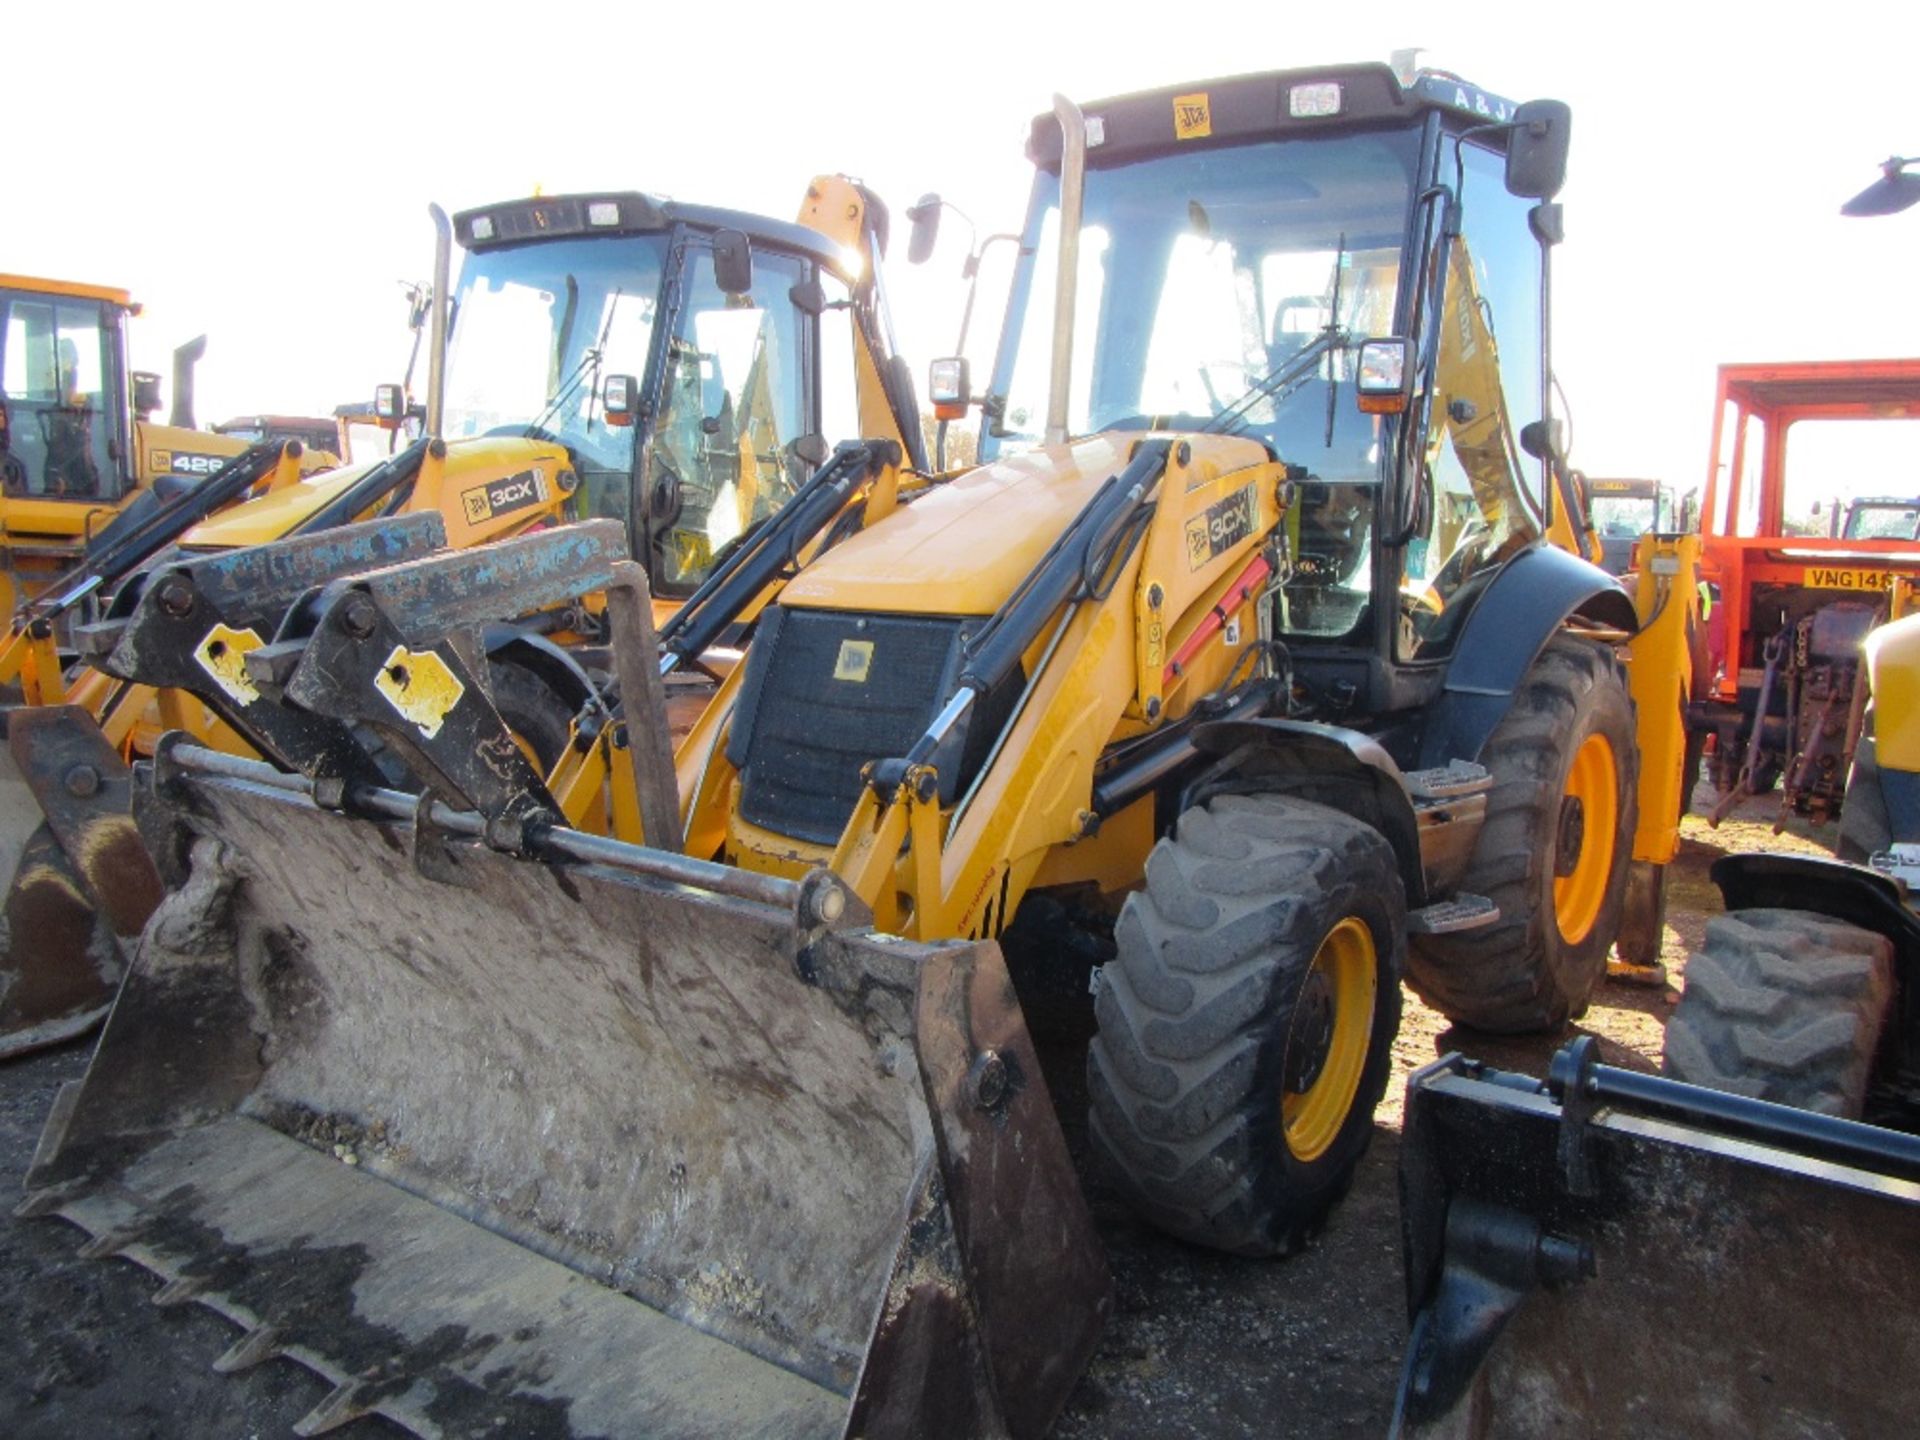 2009 JCB 3CX Wheeled Contractor Digger Loader c/w Air Con, Power Slide, Mobilizer Fitted. Reg Docs